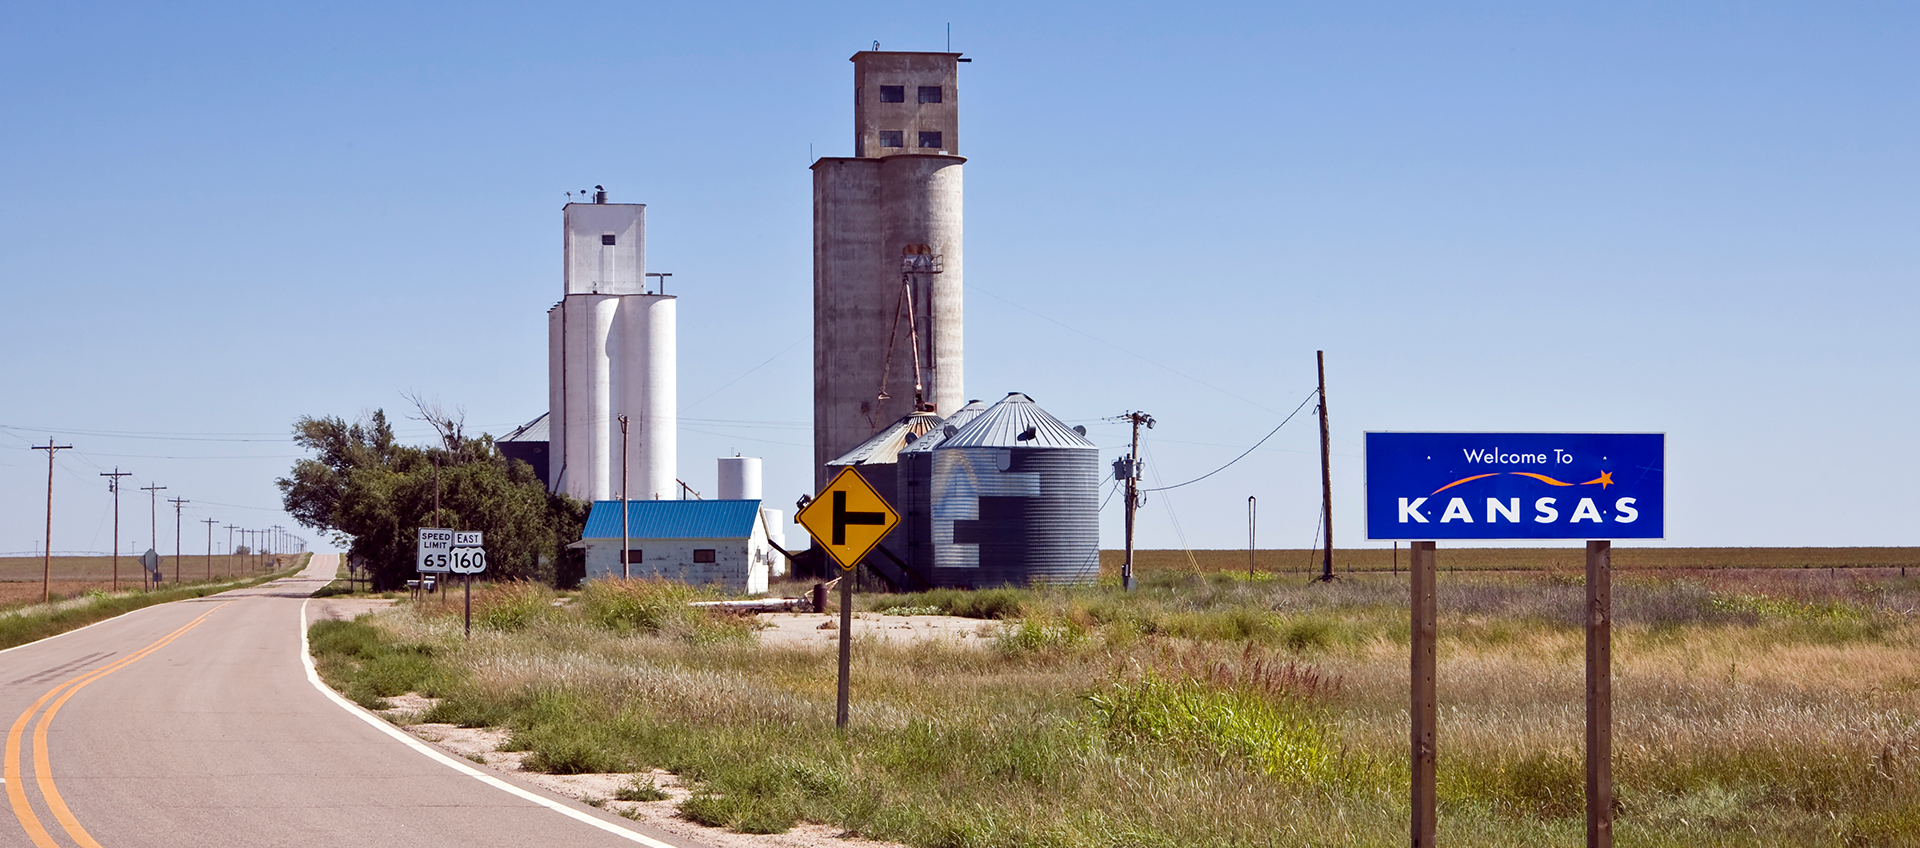 Welcome to Kansas sign with grain storage in the background